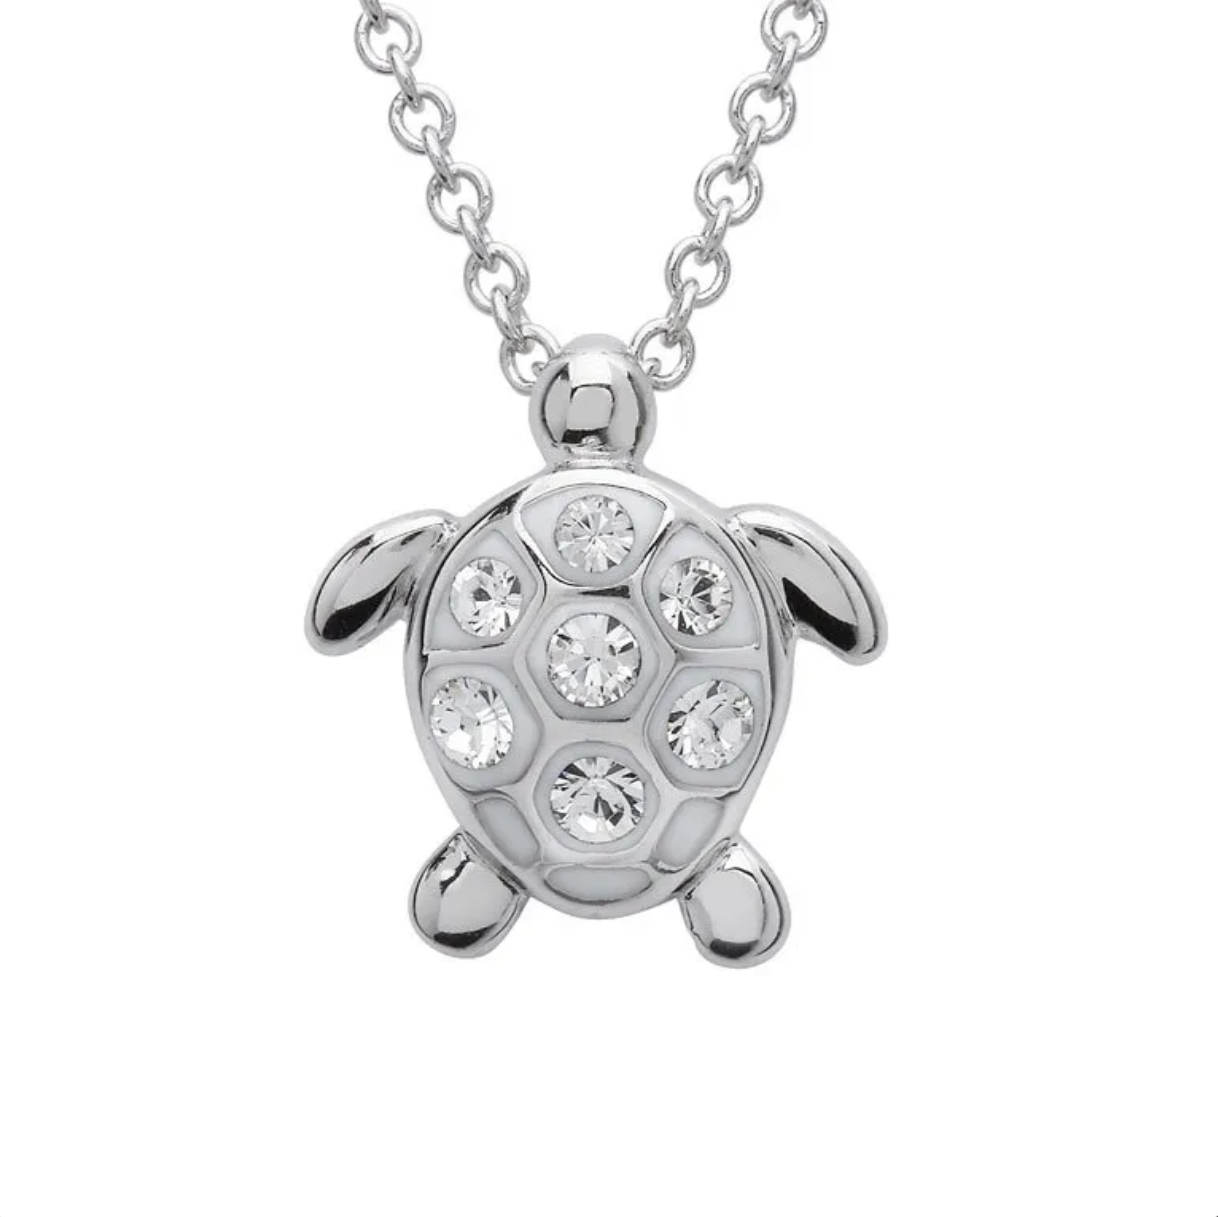 Turtle Pendant With Clear Crystals – Medium Size